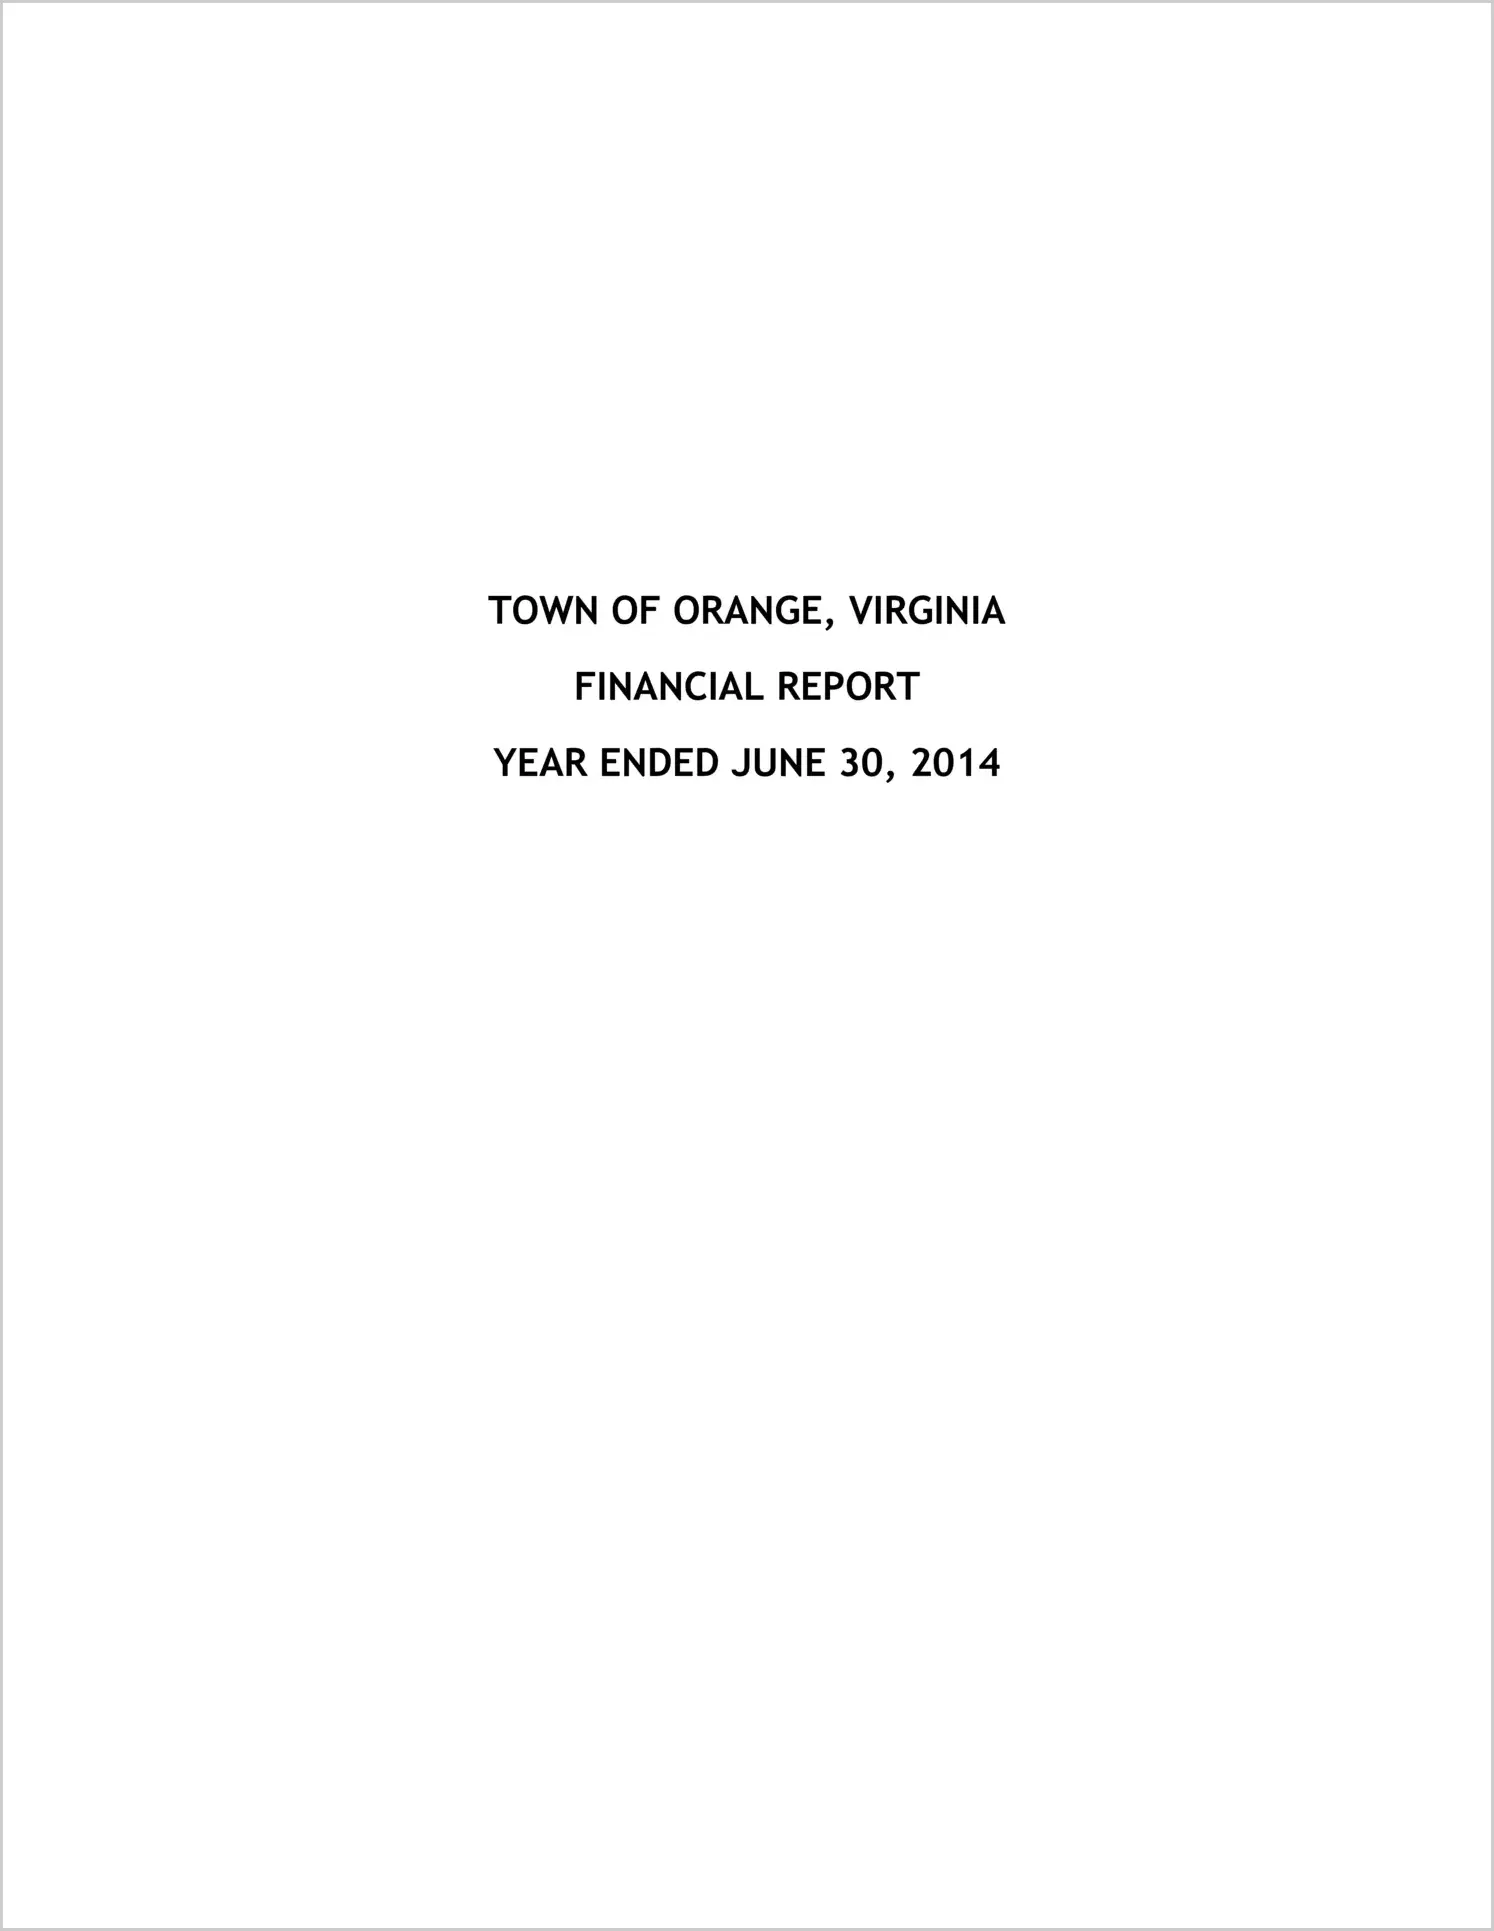 2014 Annual Financial Report for Town of Orange